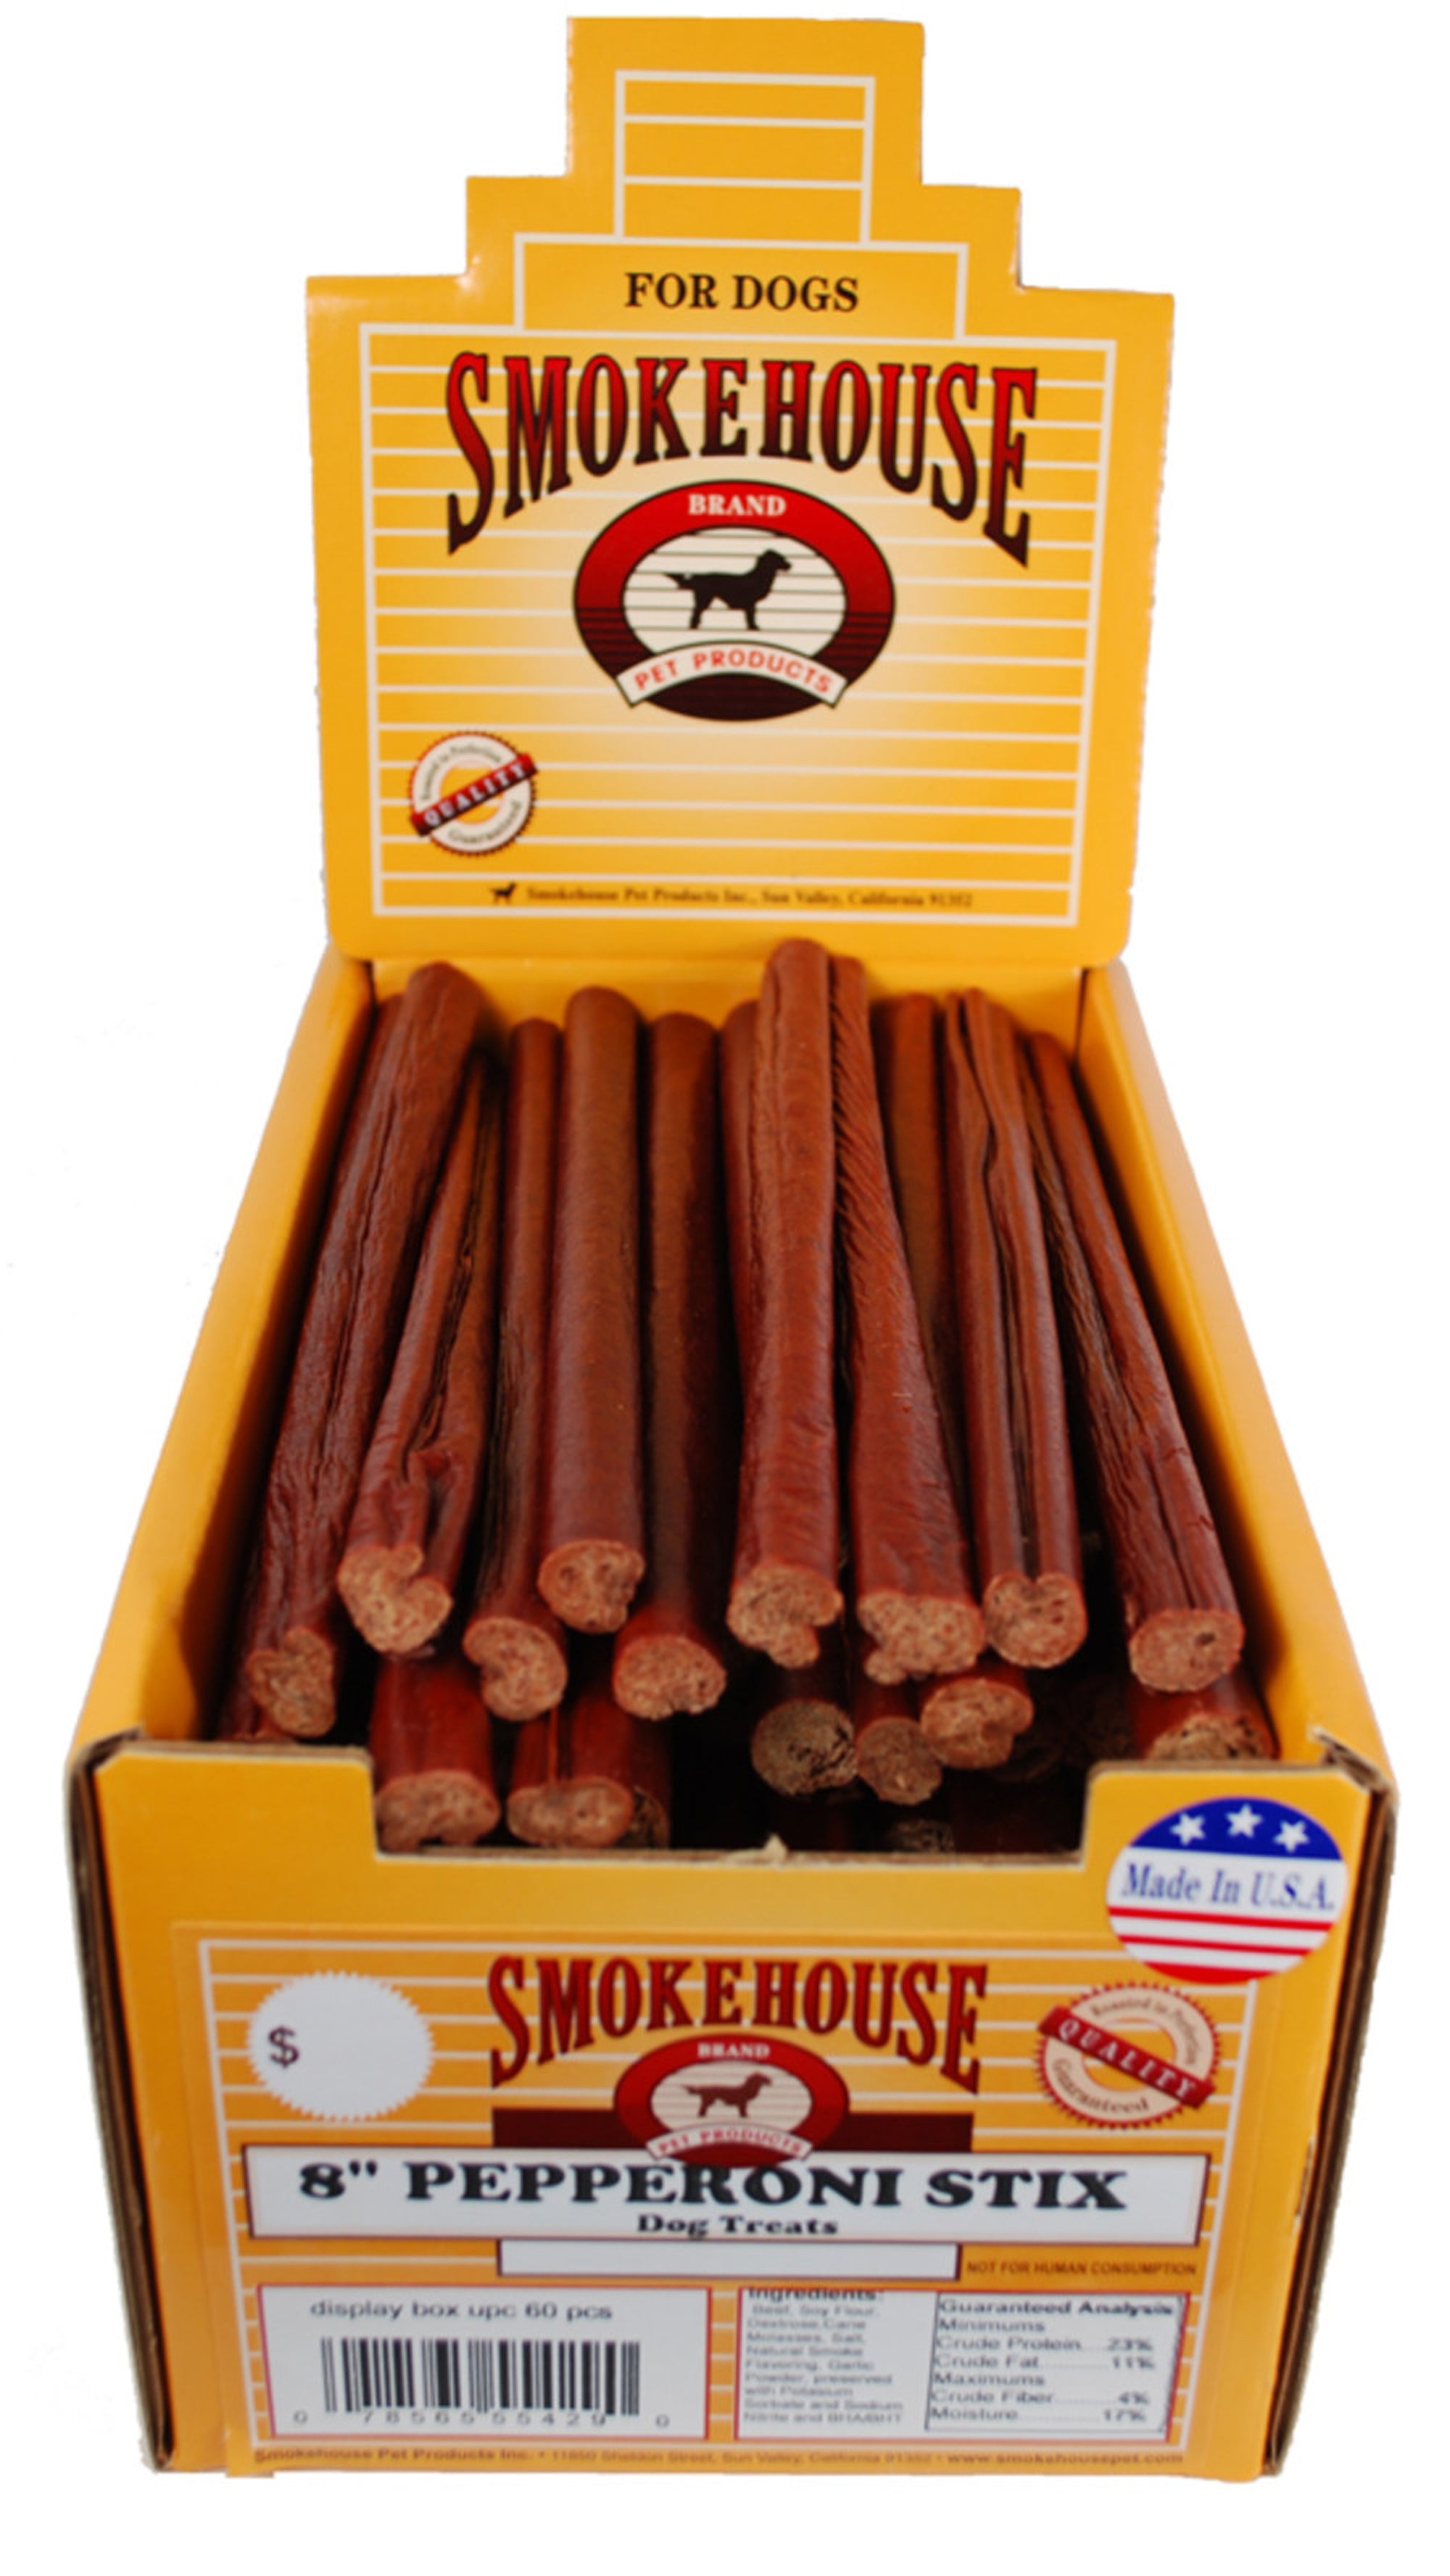 Smokehouse USA Made Pepperoni Stix Dog Treats 8 in 60 Count